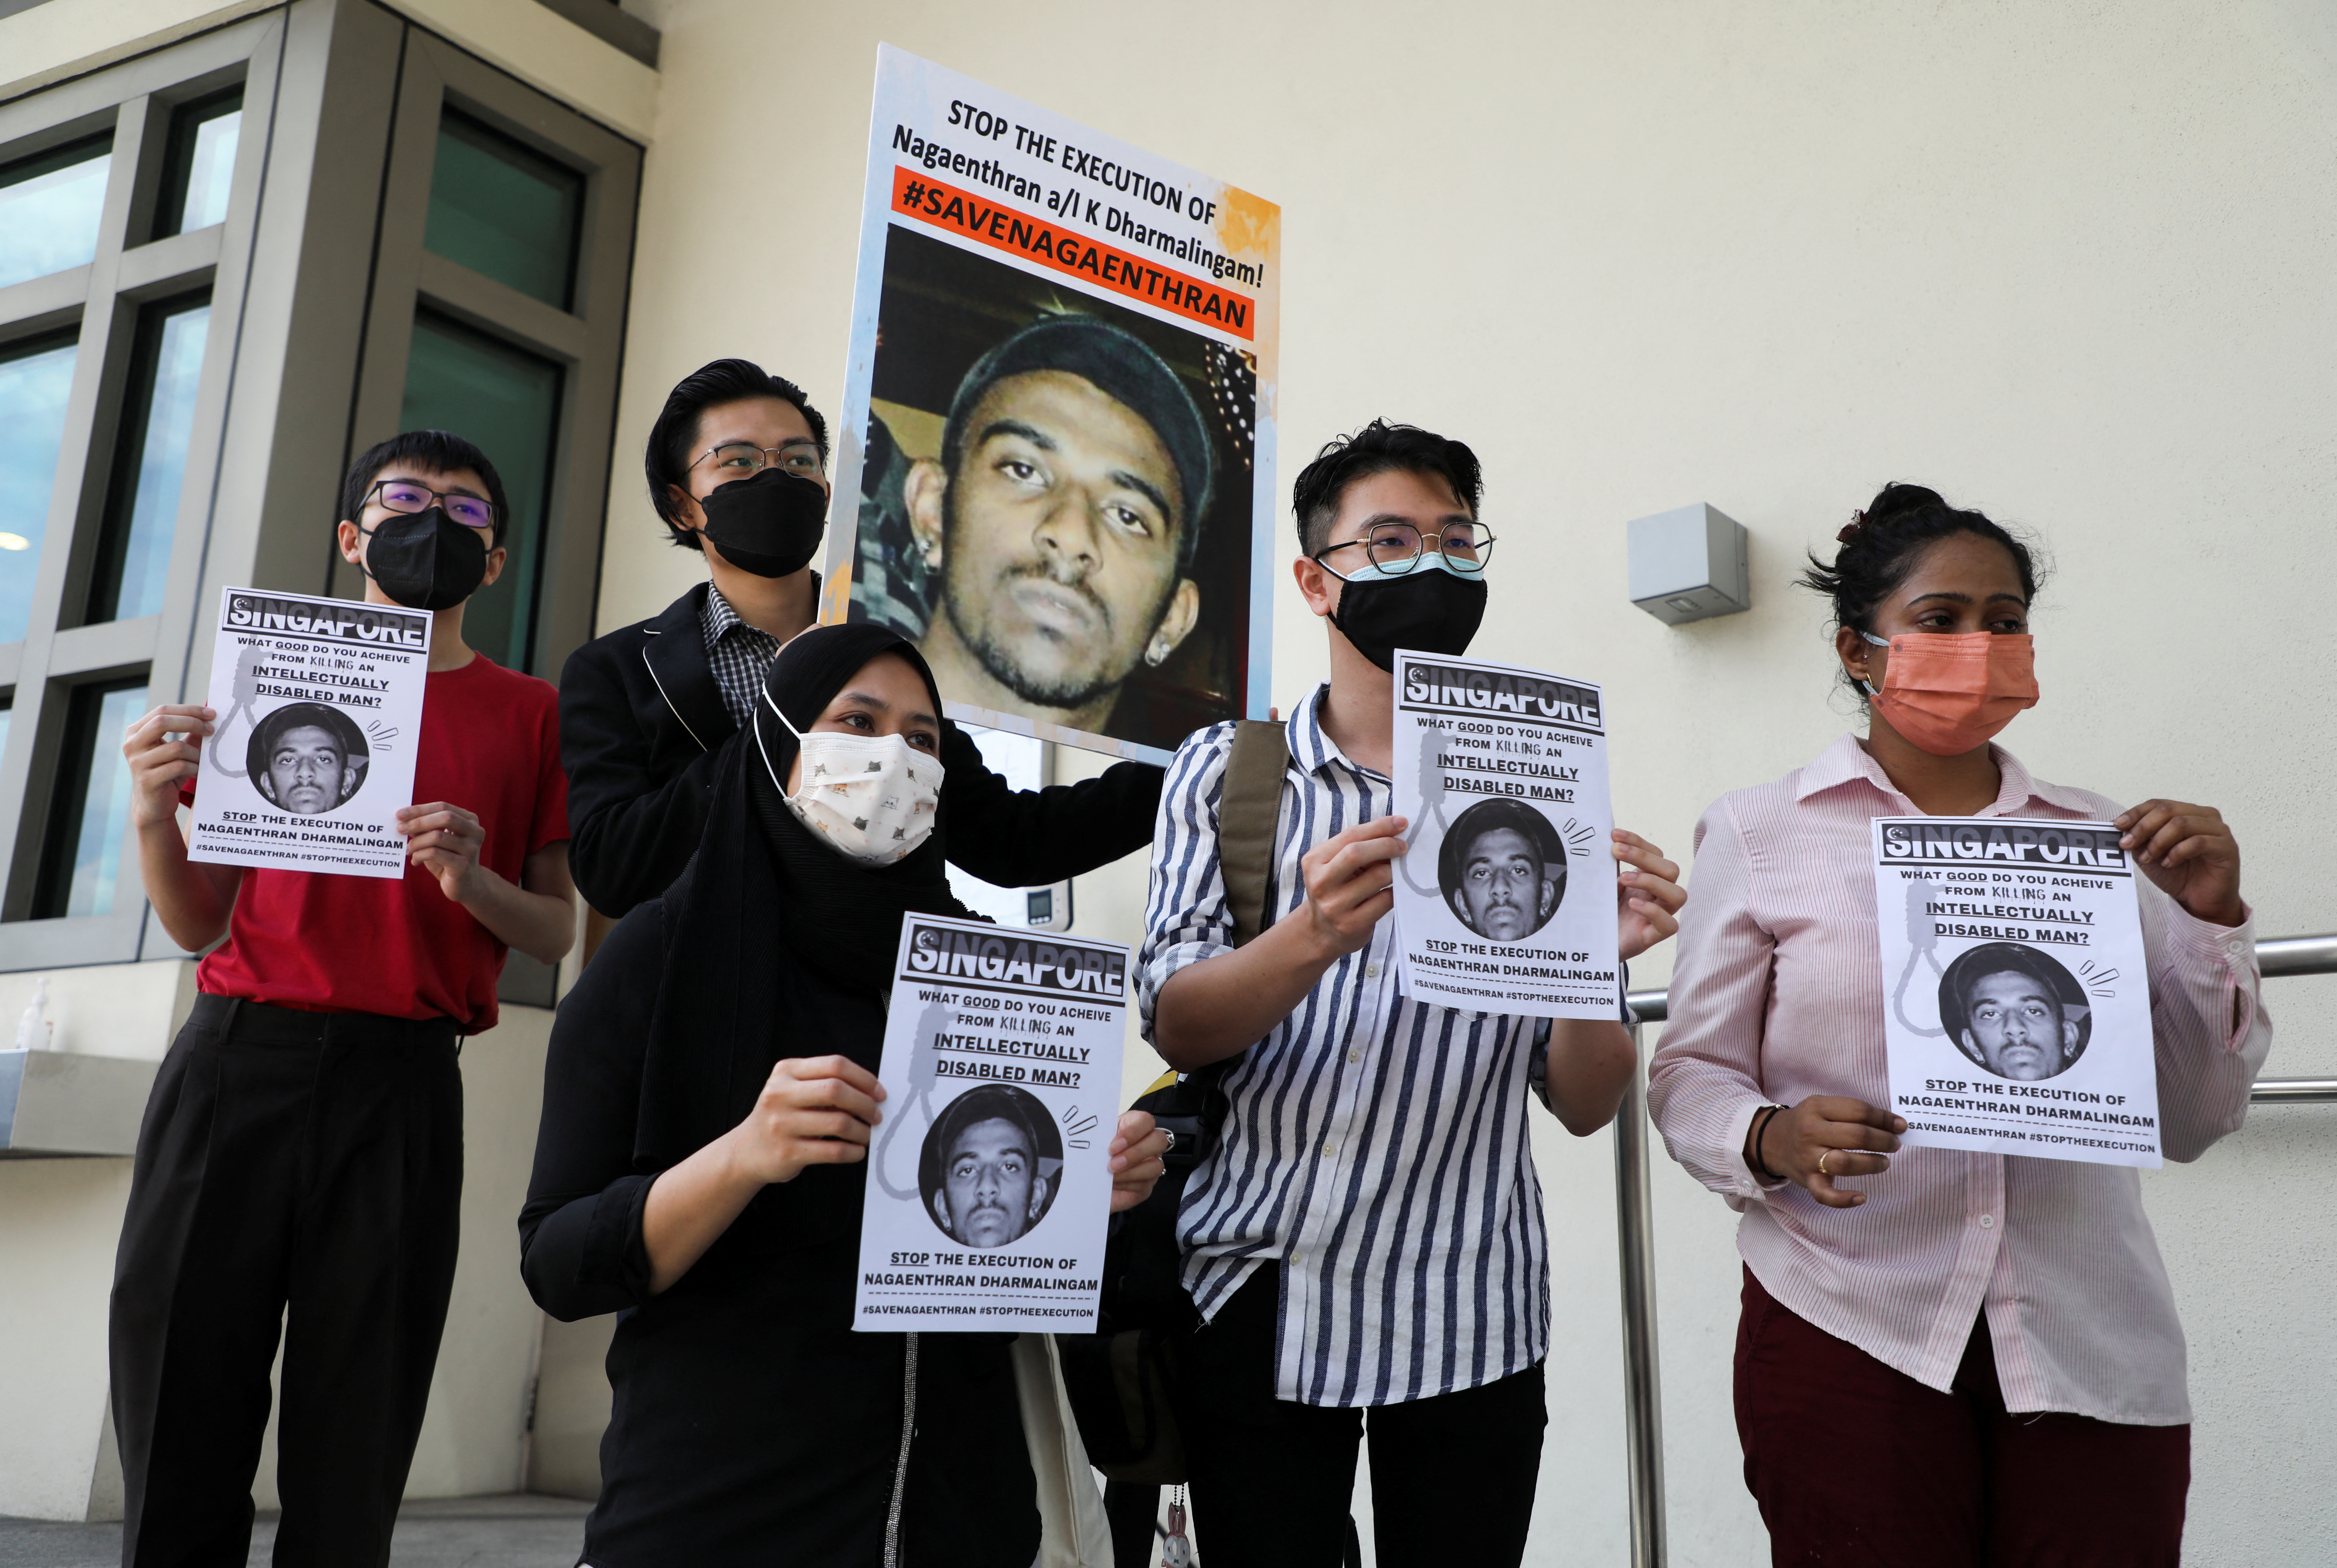 Activists demonstrate against the execution of Nagaenthran Dharmalingam, a Malaysian whose intellect, his defence and human rights groups have argued, was at a level recognised as a mental disability, for drug trafficking, in Kuala Lumpur